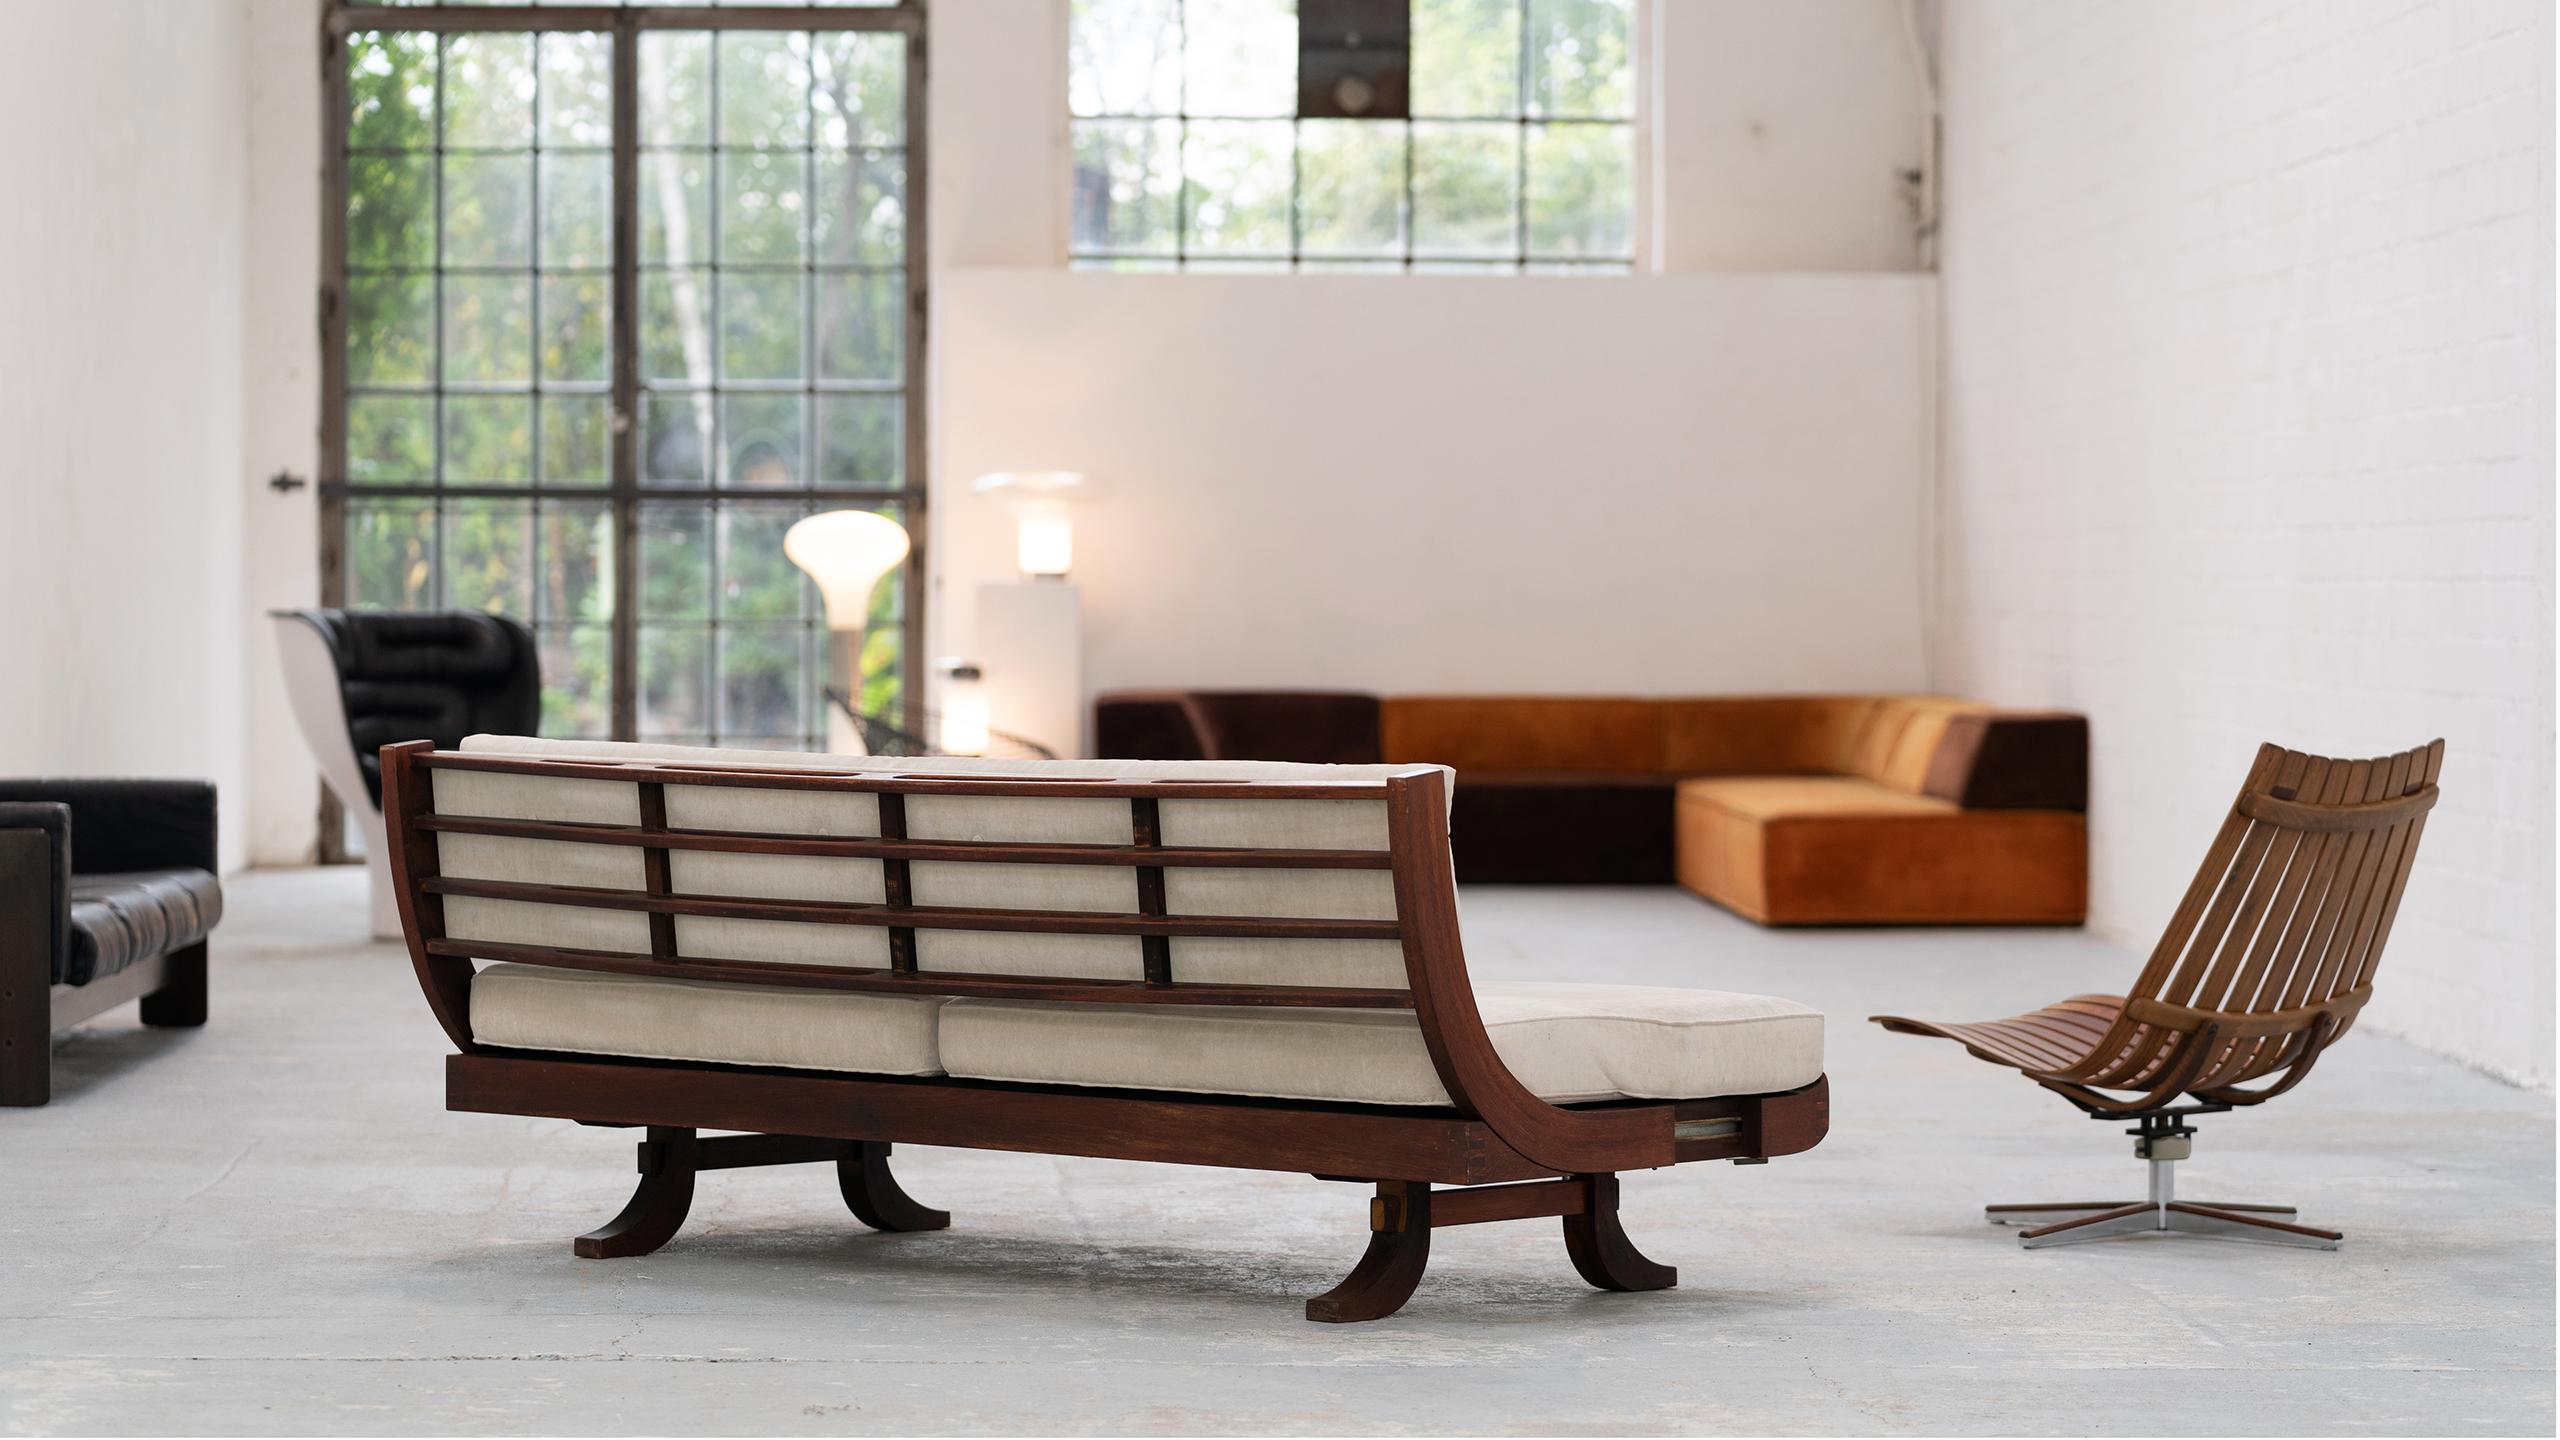 Brazilian Daybed & Sofa, 1966, Sophisticated Wood Details, Lounge & Relax 3